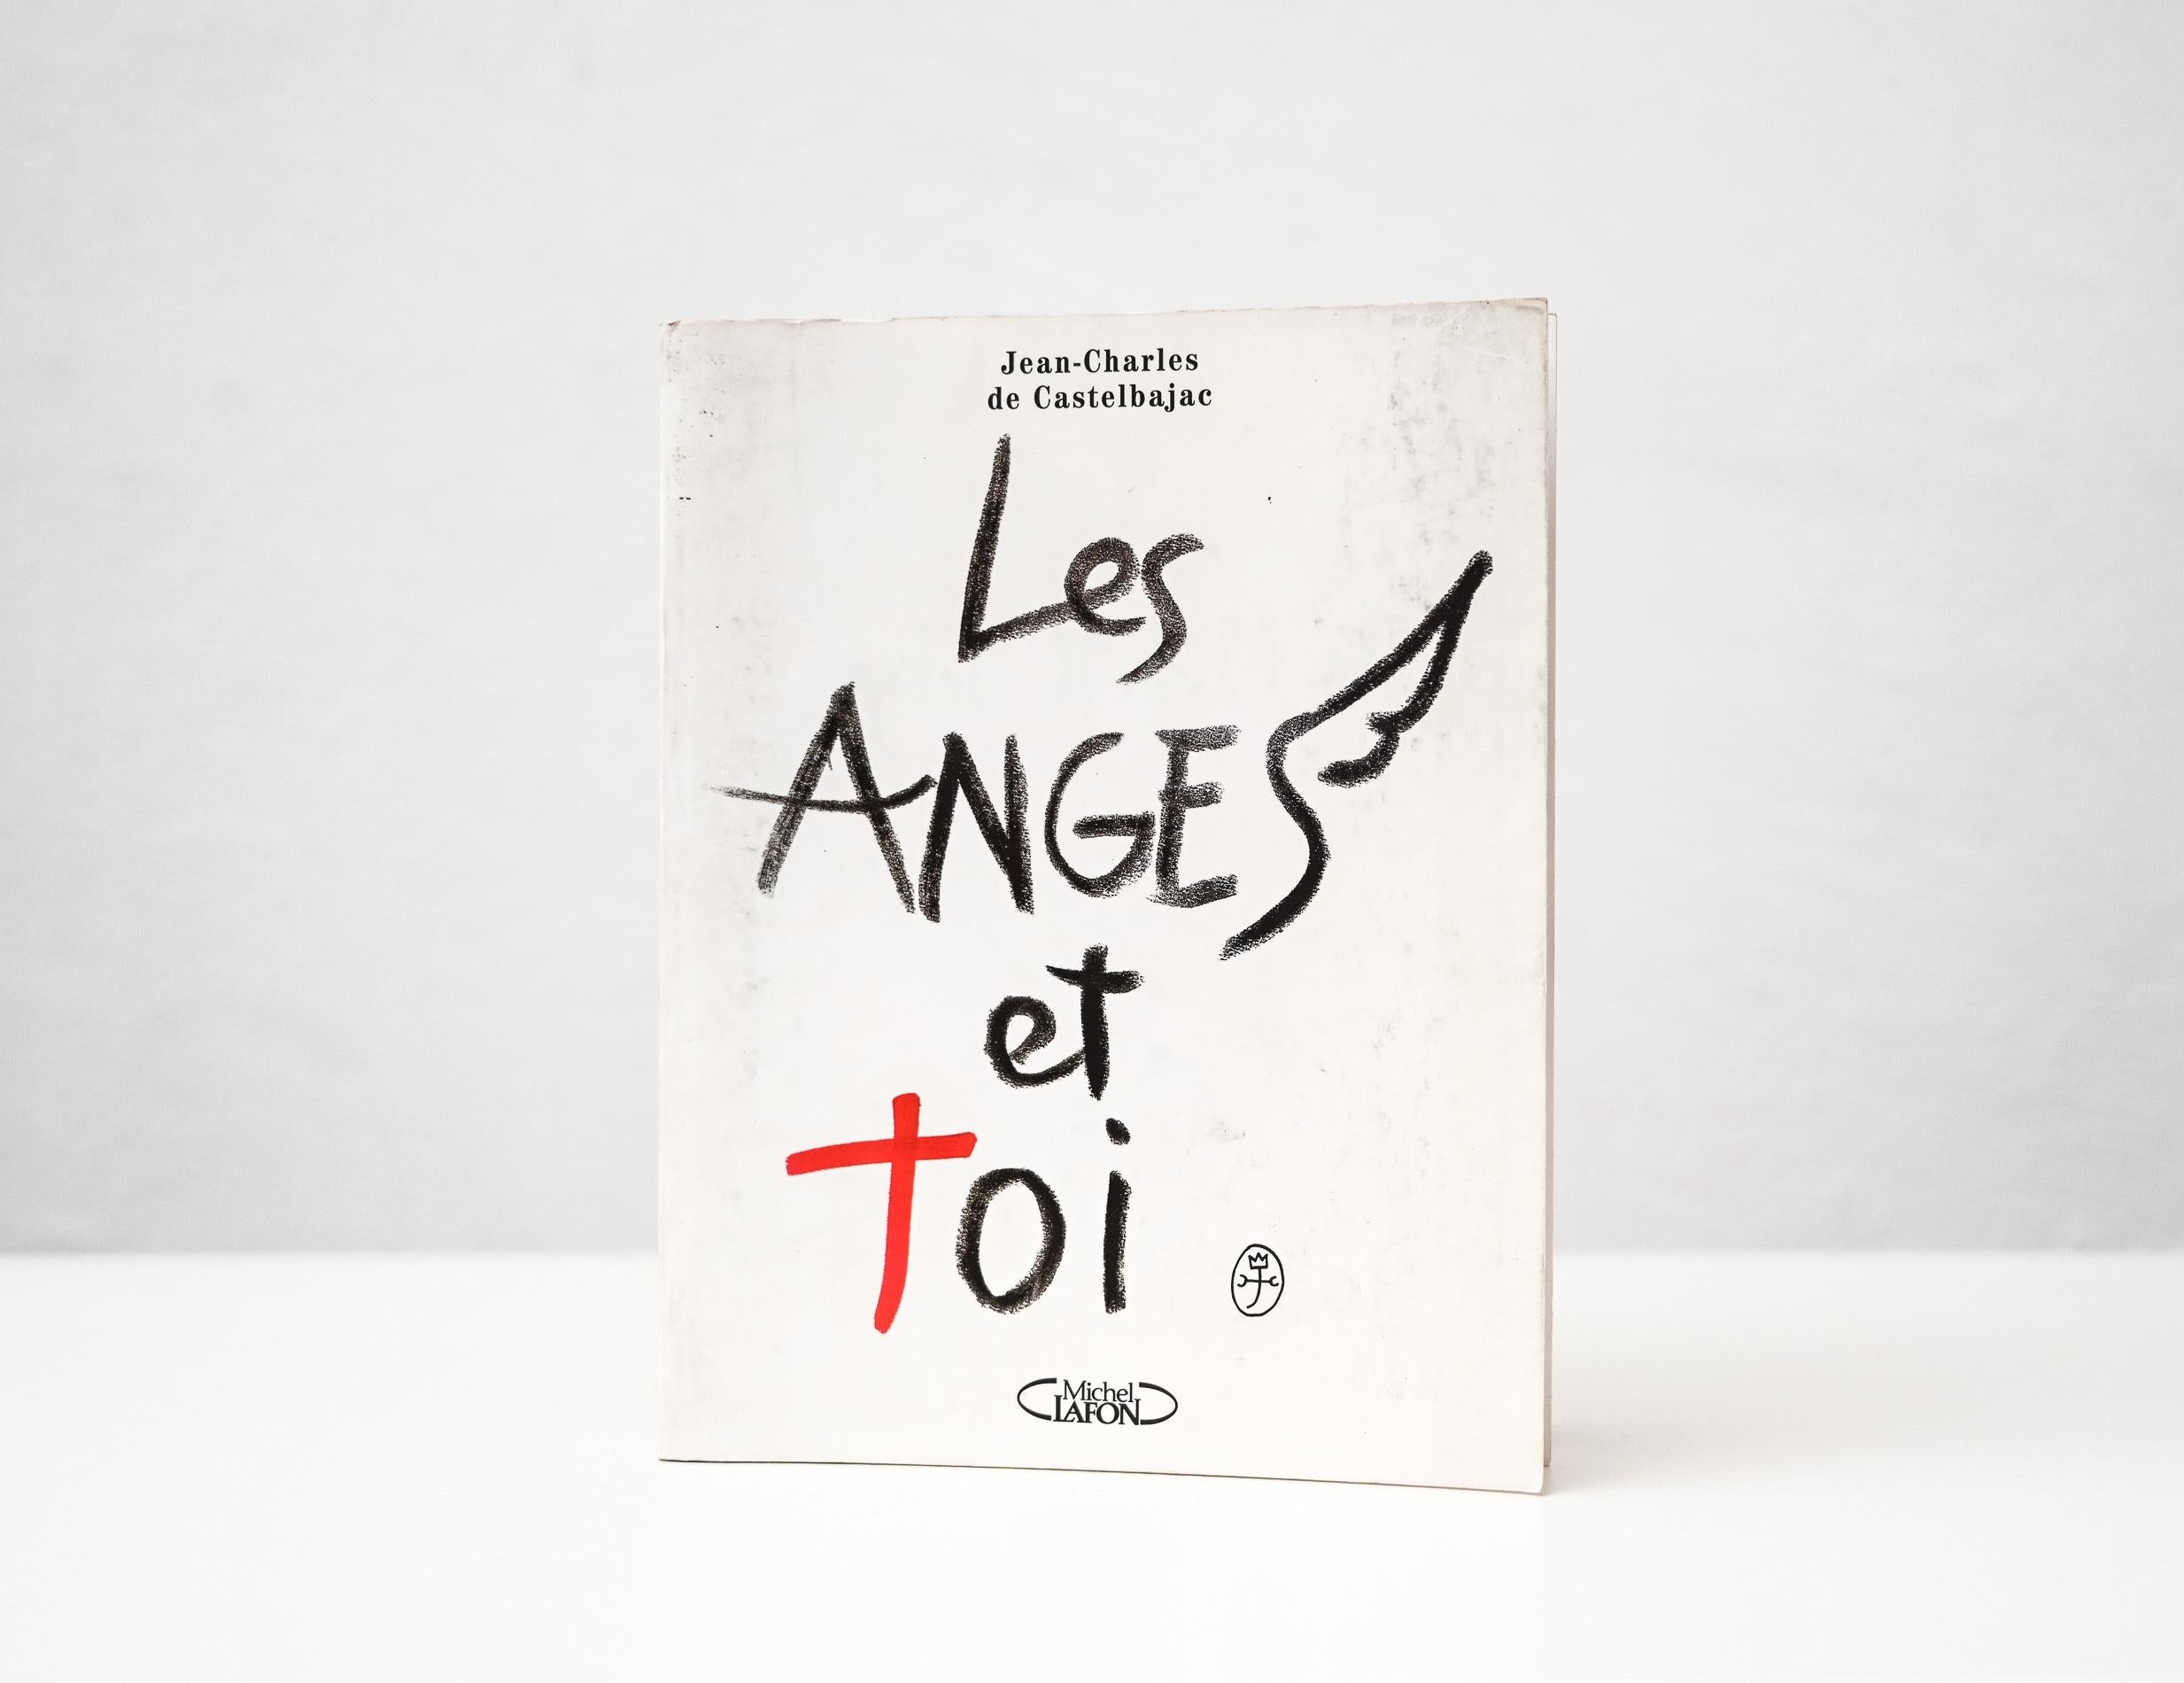 French Signed Copy of “Les Anges Et Toi” by Jean-Charles de Castelbajac For Sale